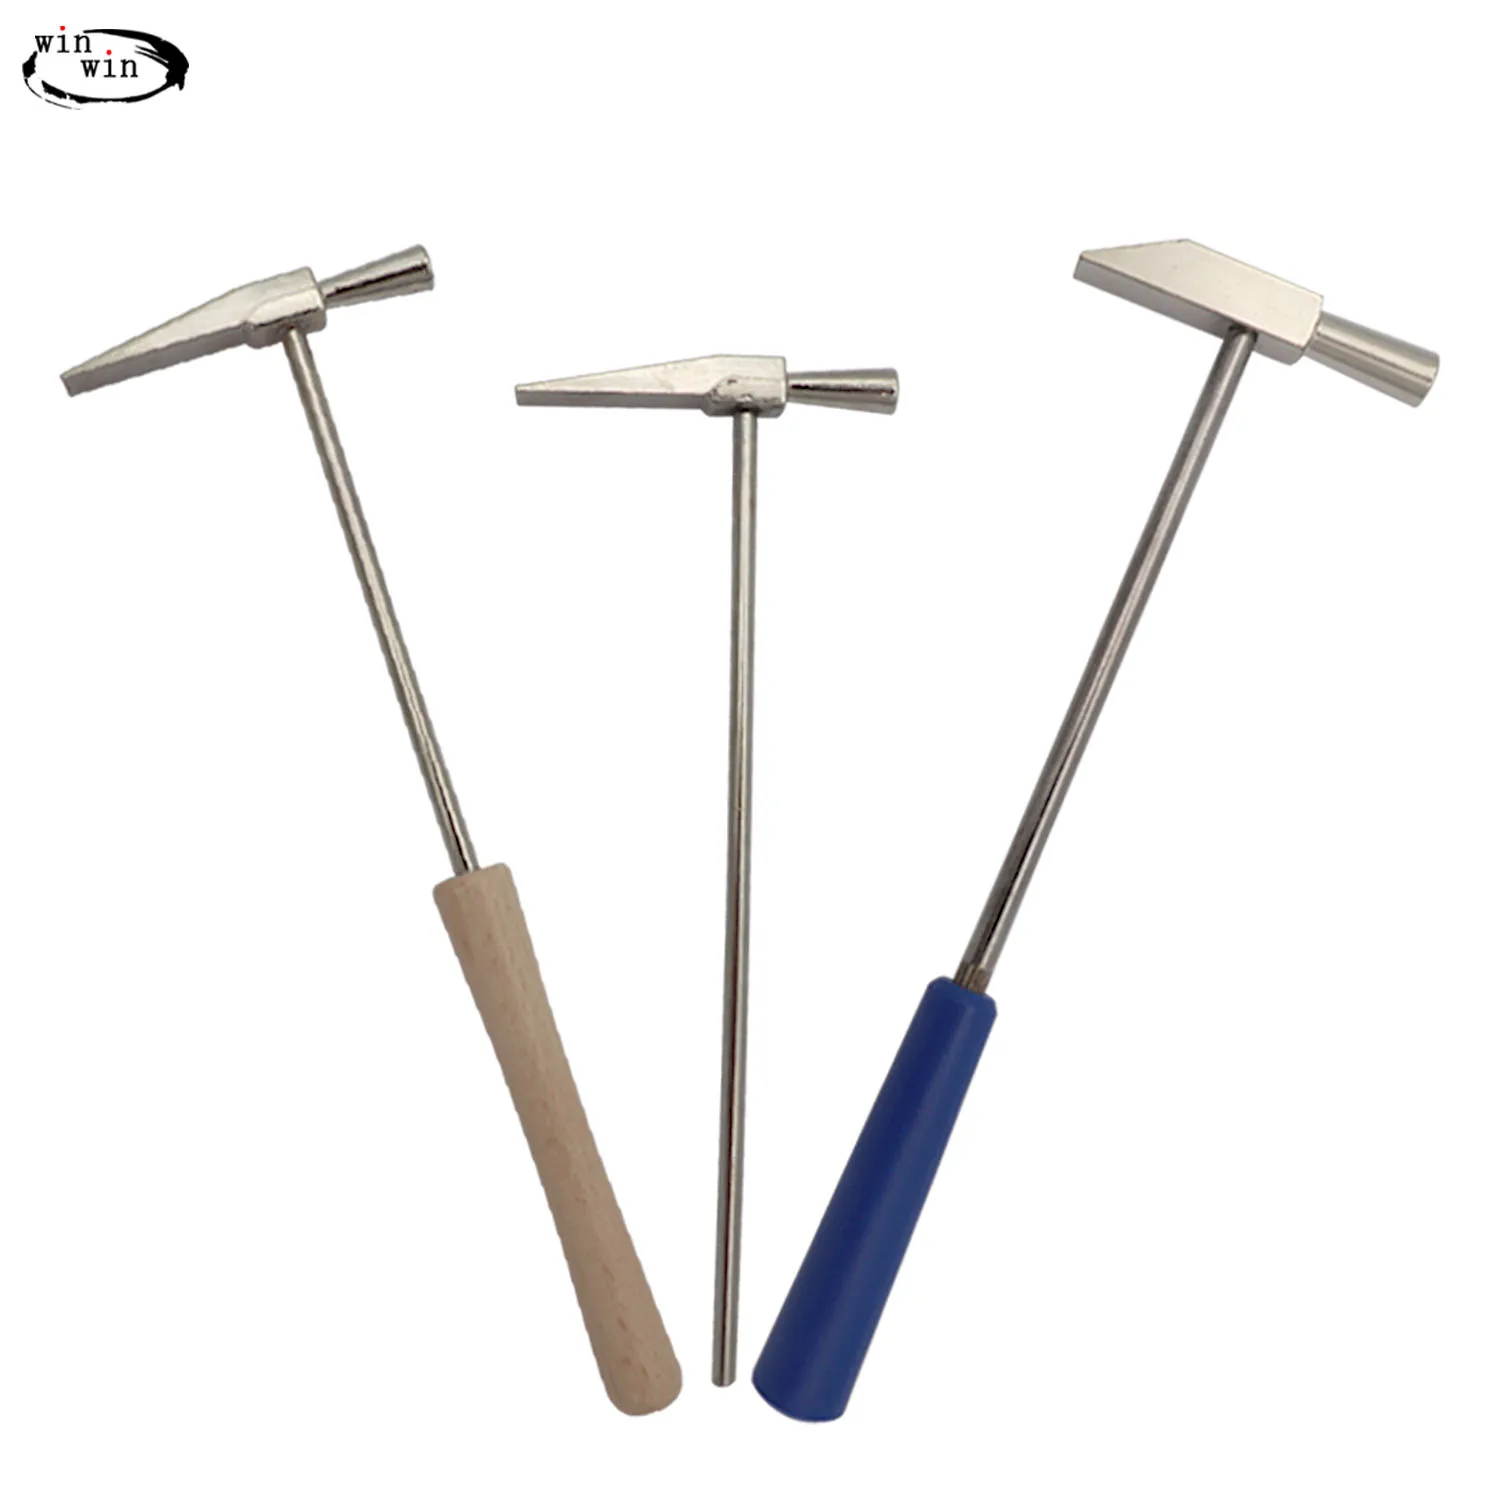 Berkem 7 Kinds Of Hammer Practical Round Head Hammer with Wooden/Plastic Handle for Jewelry Making Diy Crafts Ball Peen Hammer professional geological hammer duckbill mason hammer exploitation of mineral reso